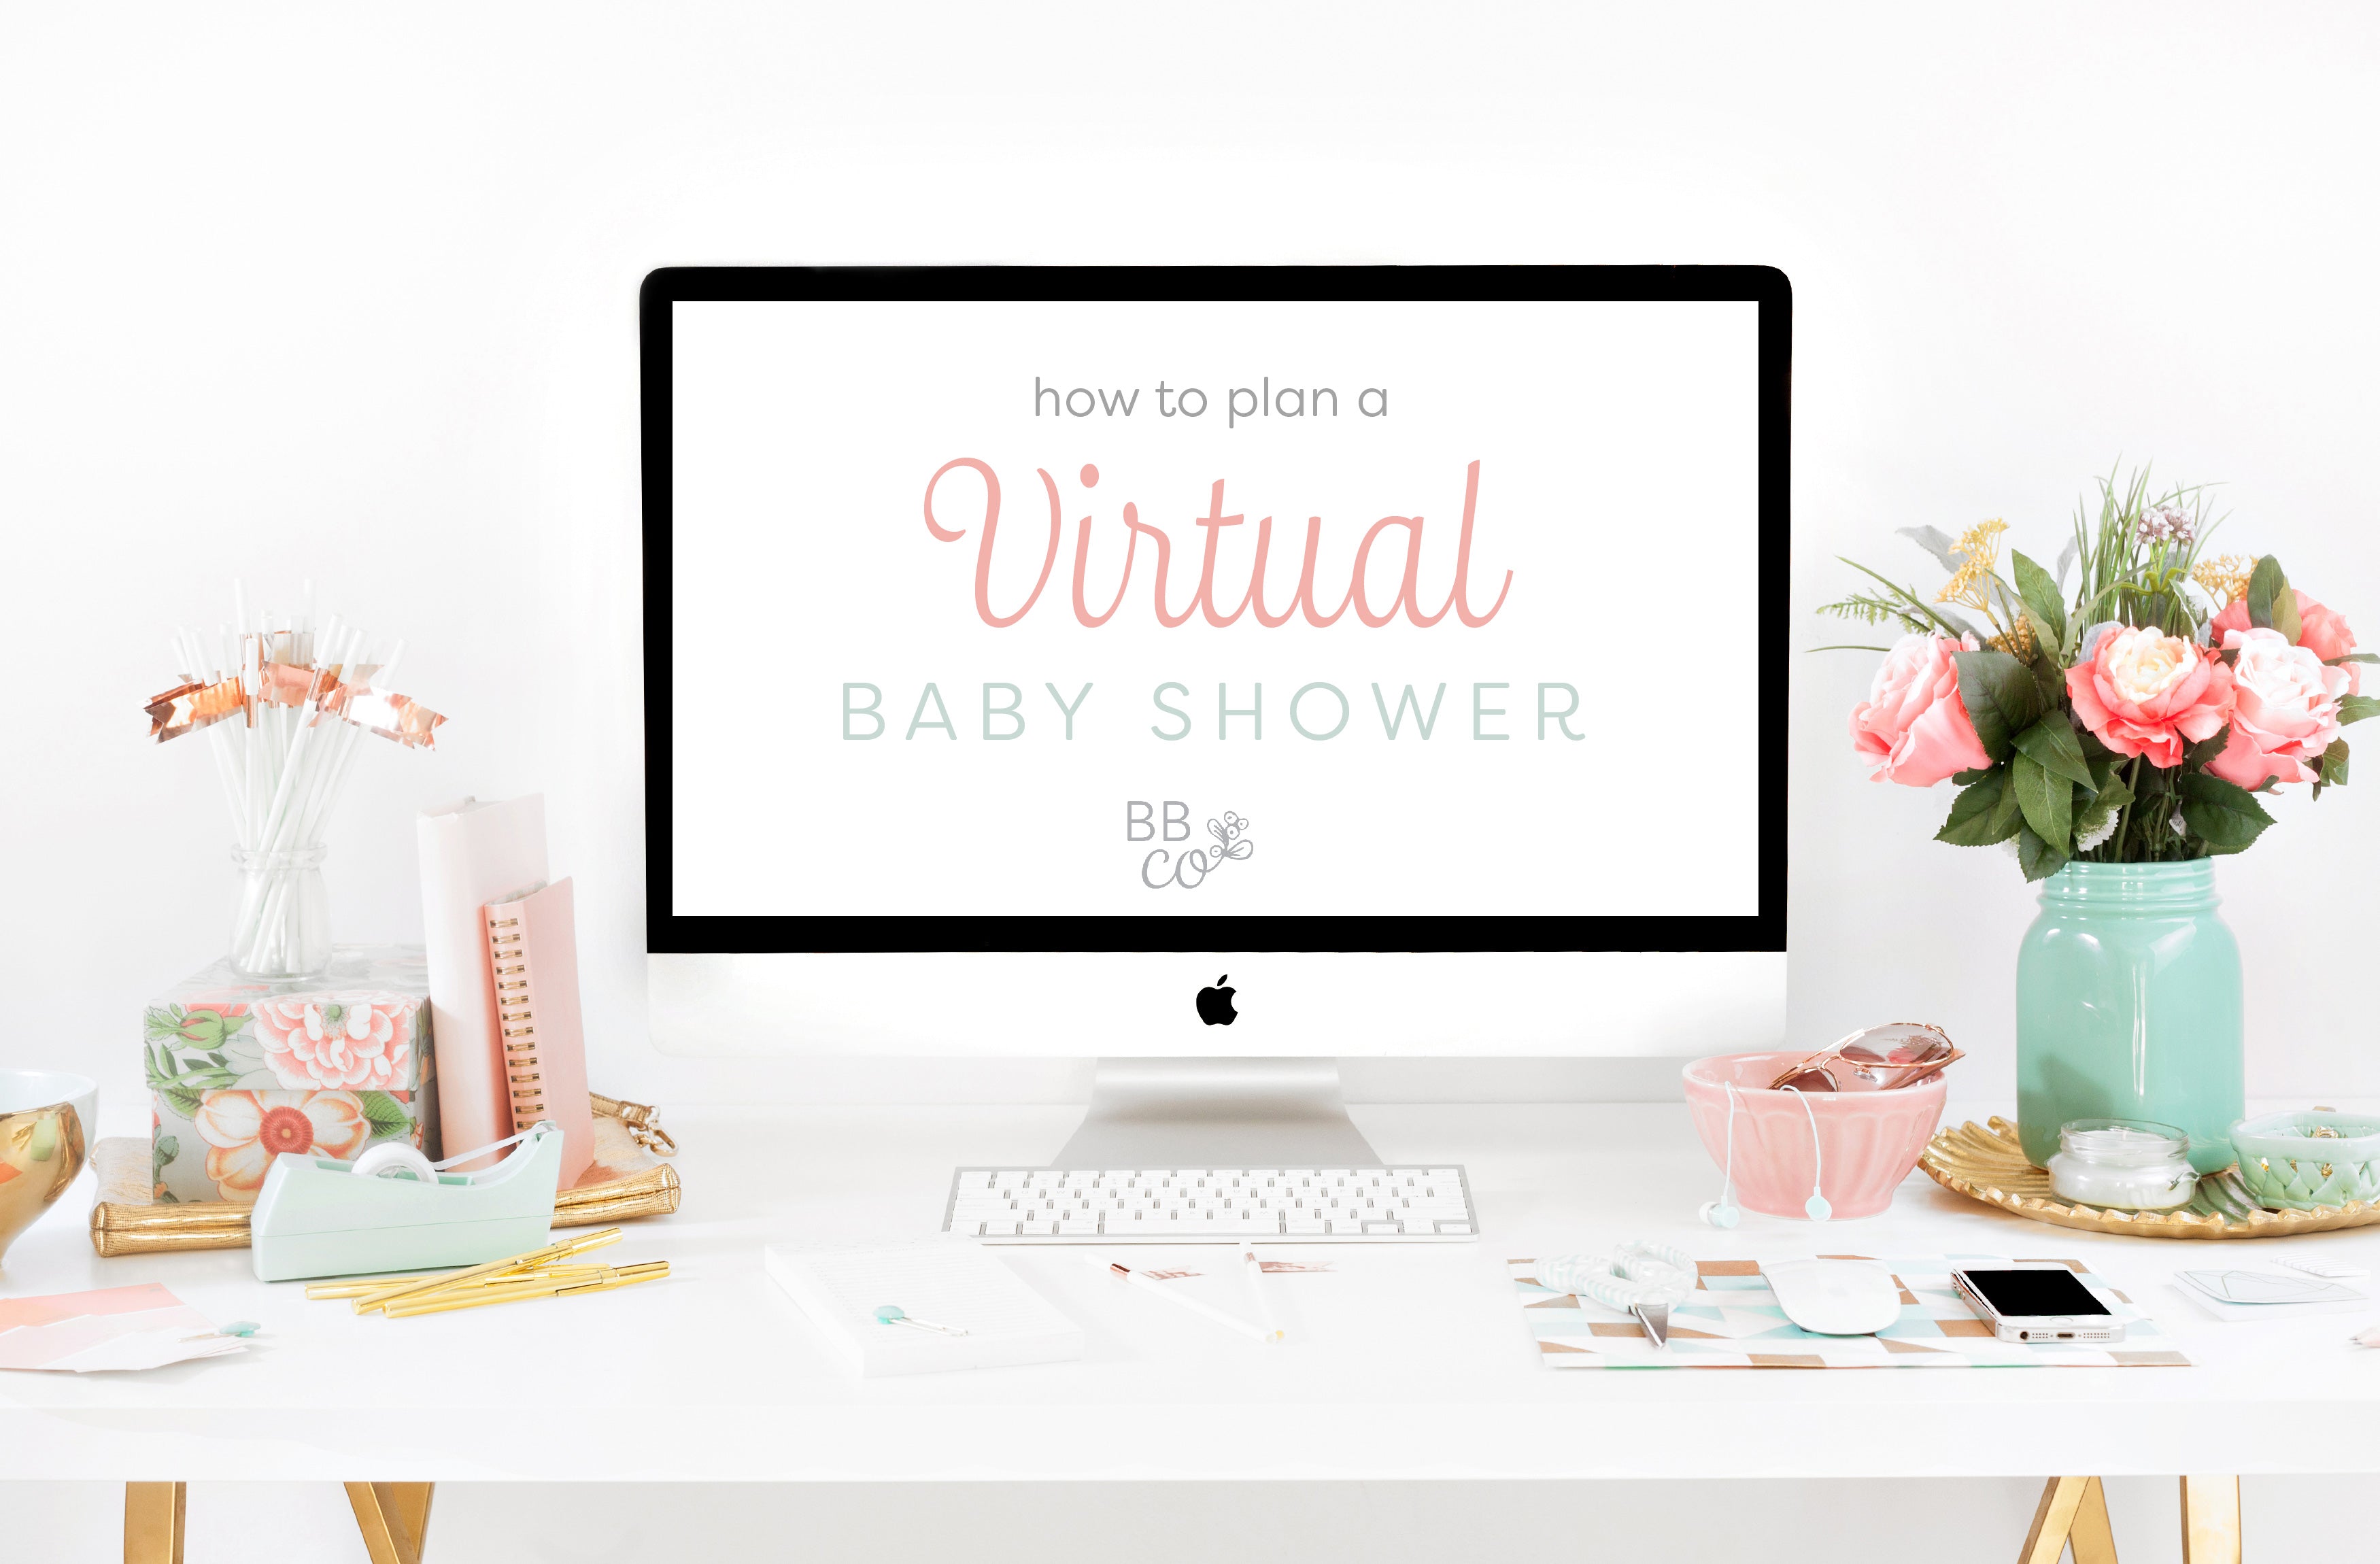 How to Host a Virtual Baby Shower